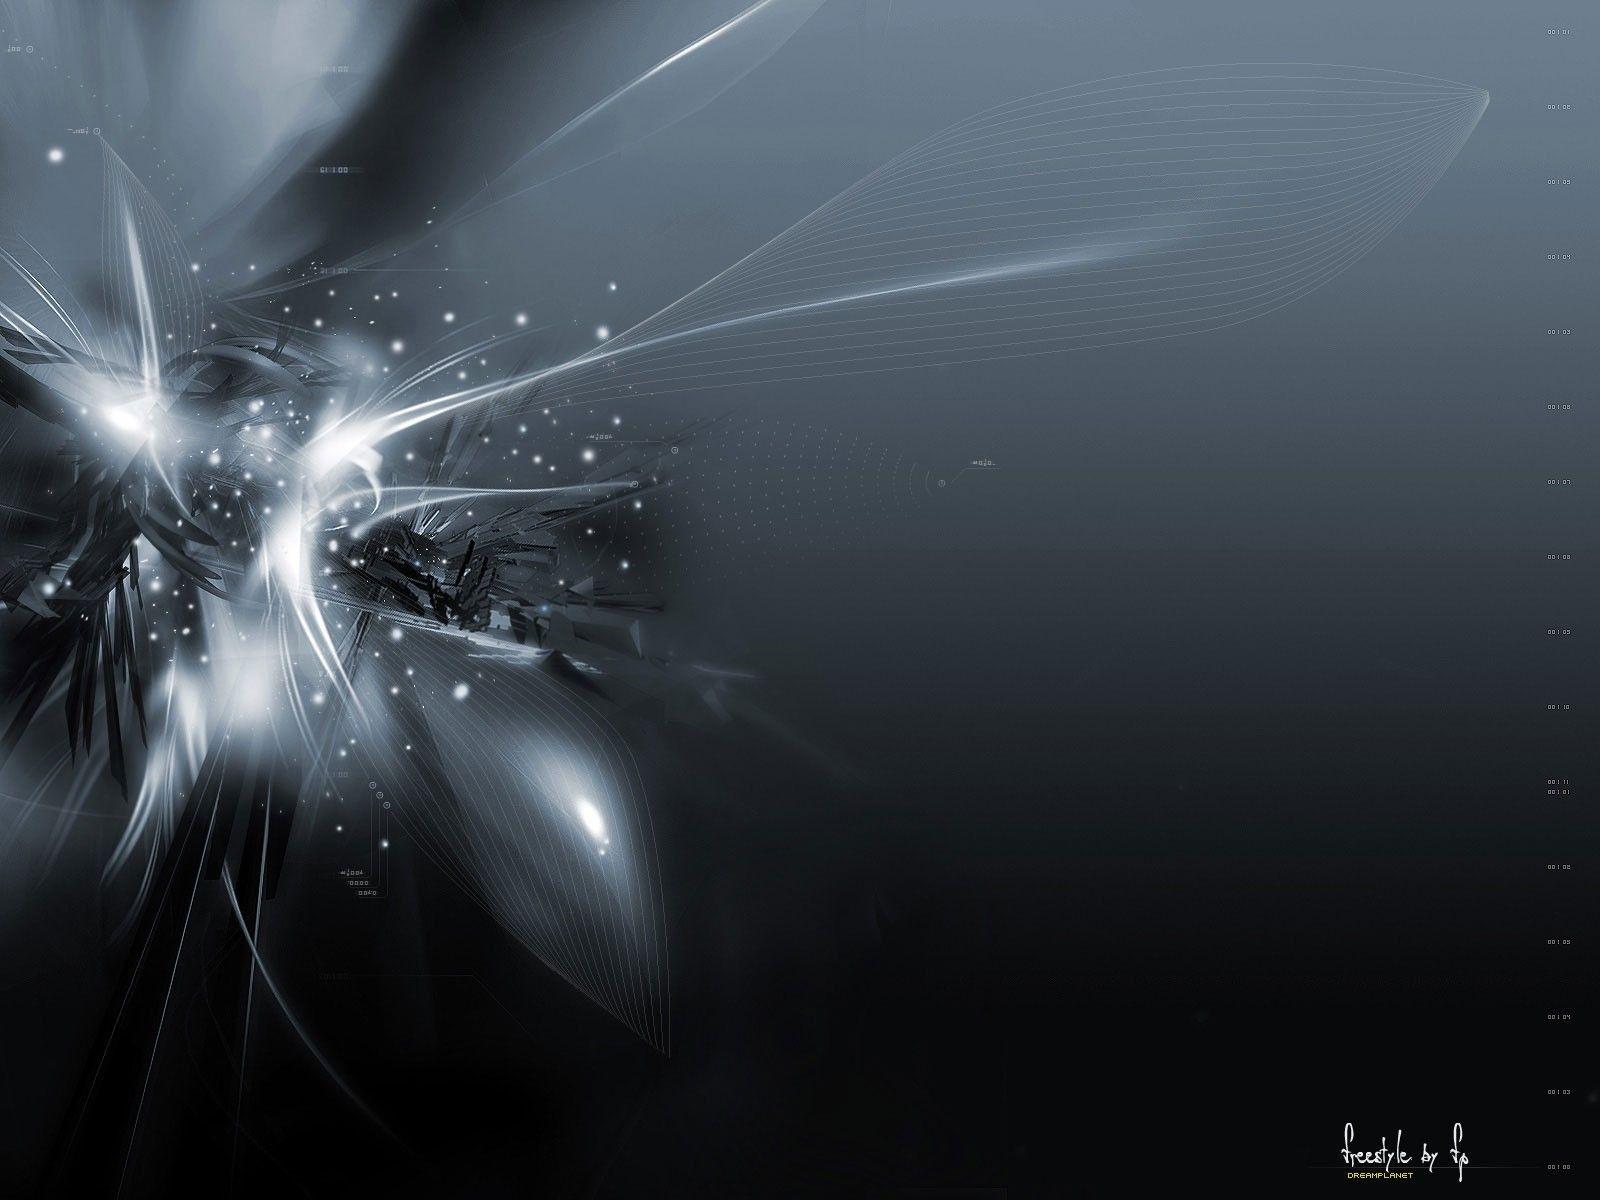 Silver Abstract Wallpapers Wallpaper Cave